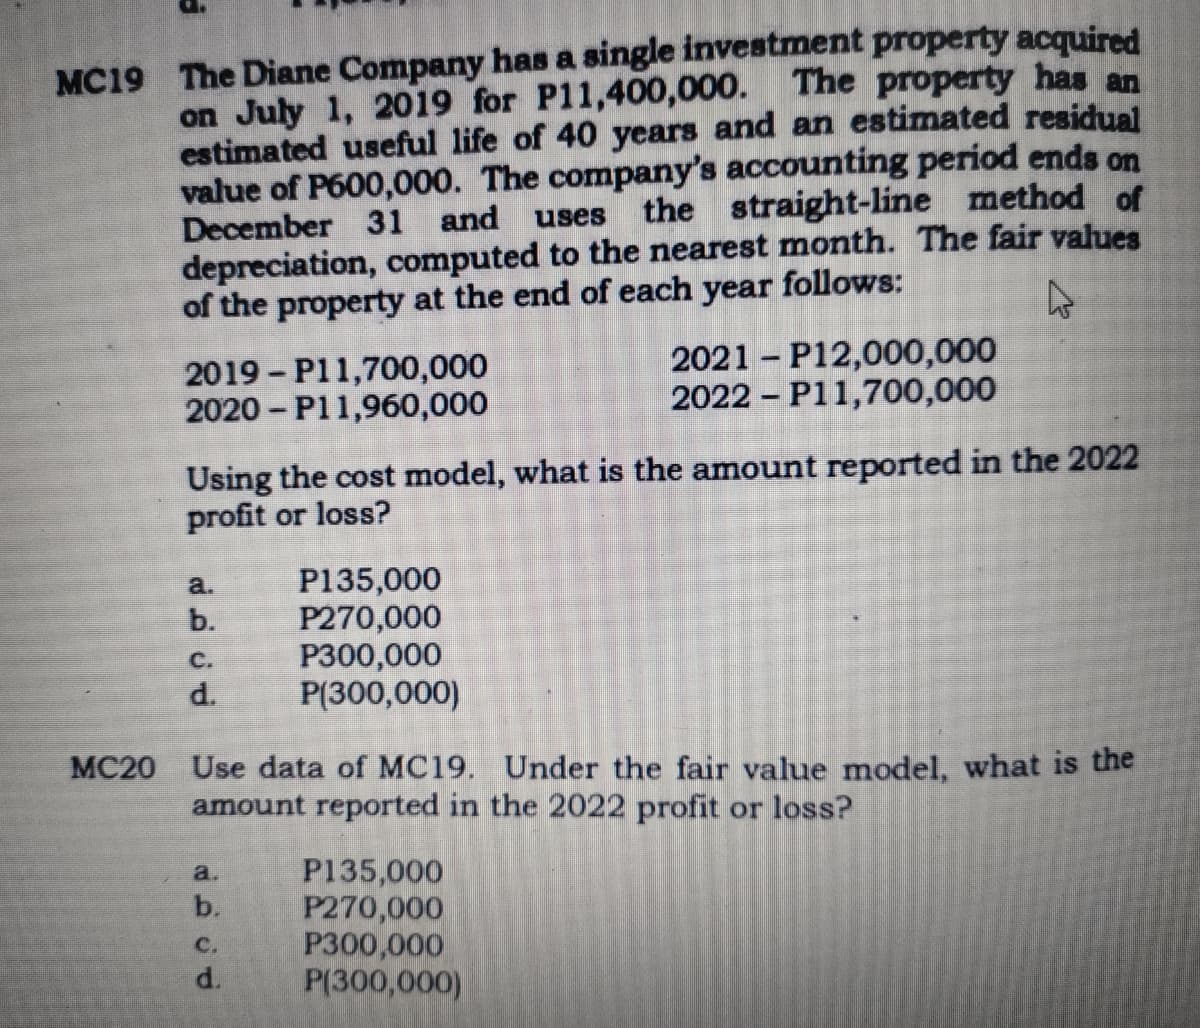 MC19 The Diane Company has a single investment property acquired
on July 1, 2019 for P11,400,000. The property has an
estimated useful life of 40 years and an estimated residual
value of P600,000. The company's accounting period ends on
December 31 and
uses
the straight-line method of
depreciation, computed to the nearest month. The fair values
of the property at the end of each year follows:
2019 - P11,700,000
2020 - P11,960,000
2021 - P12,000,000
2022 - P11,700,000
Using the cost model, what is the amount reported in the 2022
profit or loss?
P135,000
P270,000
P300,000
P(300,000)
a.
b.
с.
d.
MC20 Use data of MC19. Under the fair value model, what is the
amount reported in the 2022 profit or loss?
P135,000
P270,000
P300,000
P(300,000)
a.
b.
с.
d.
